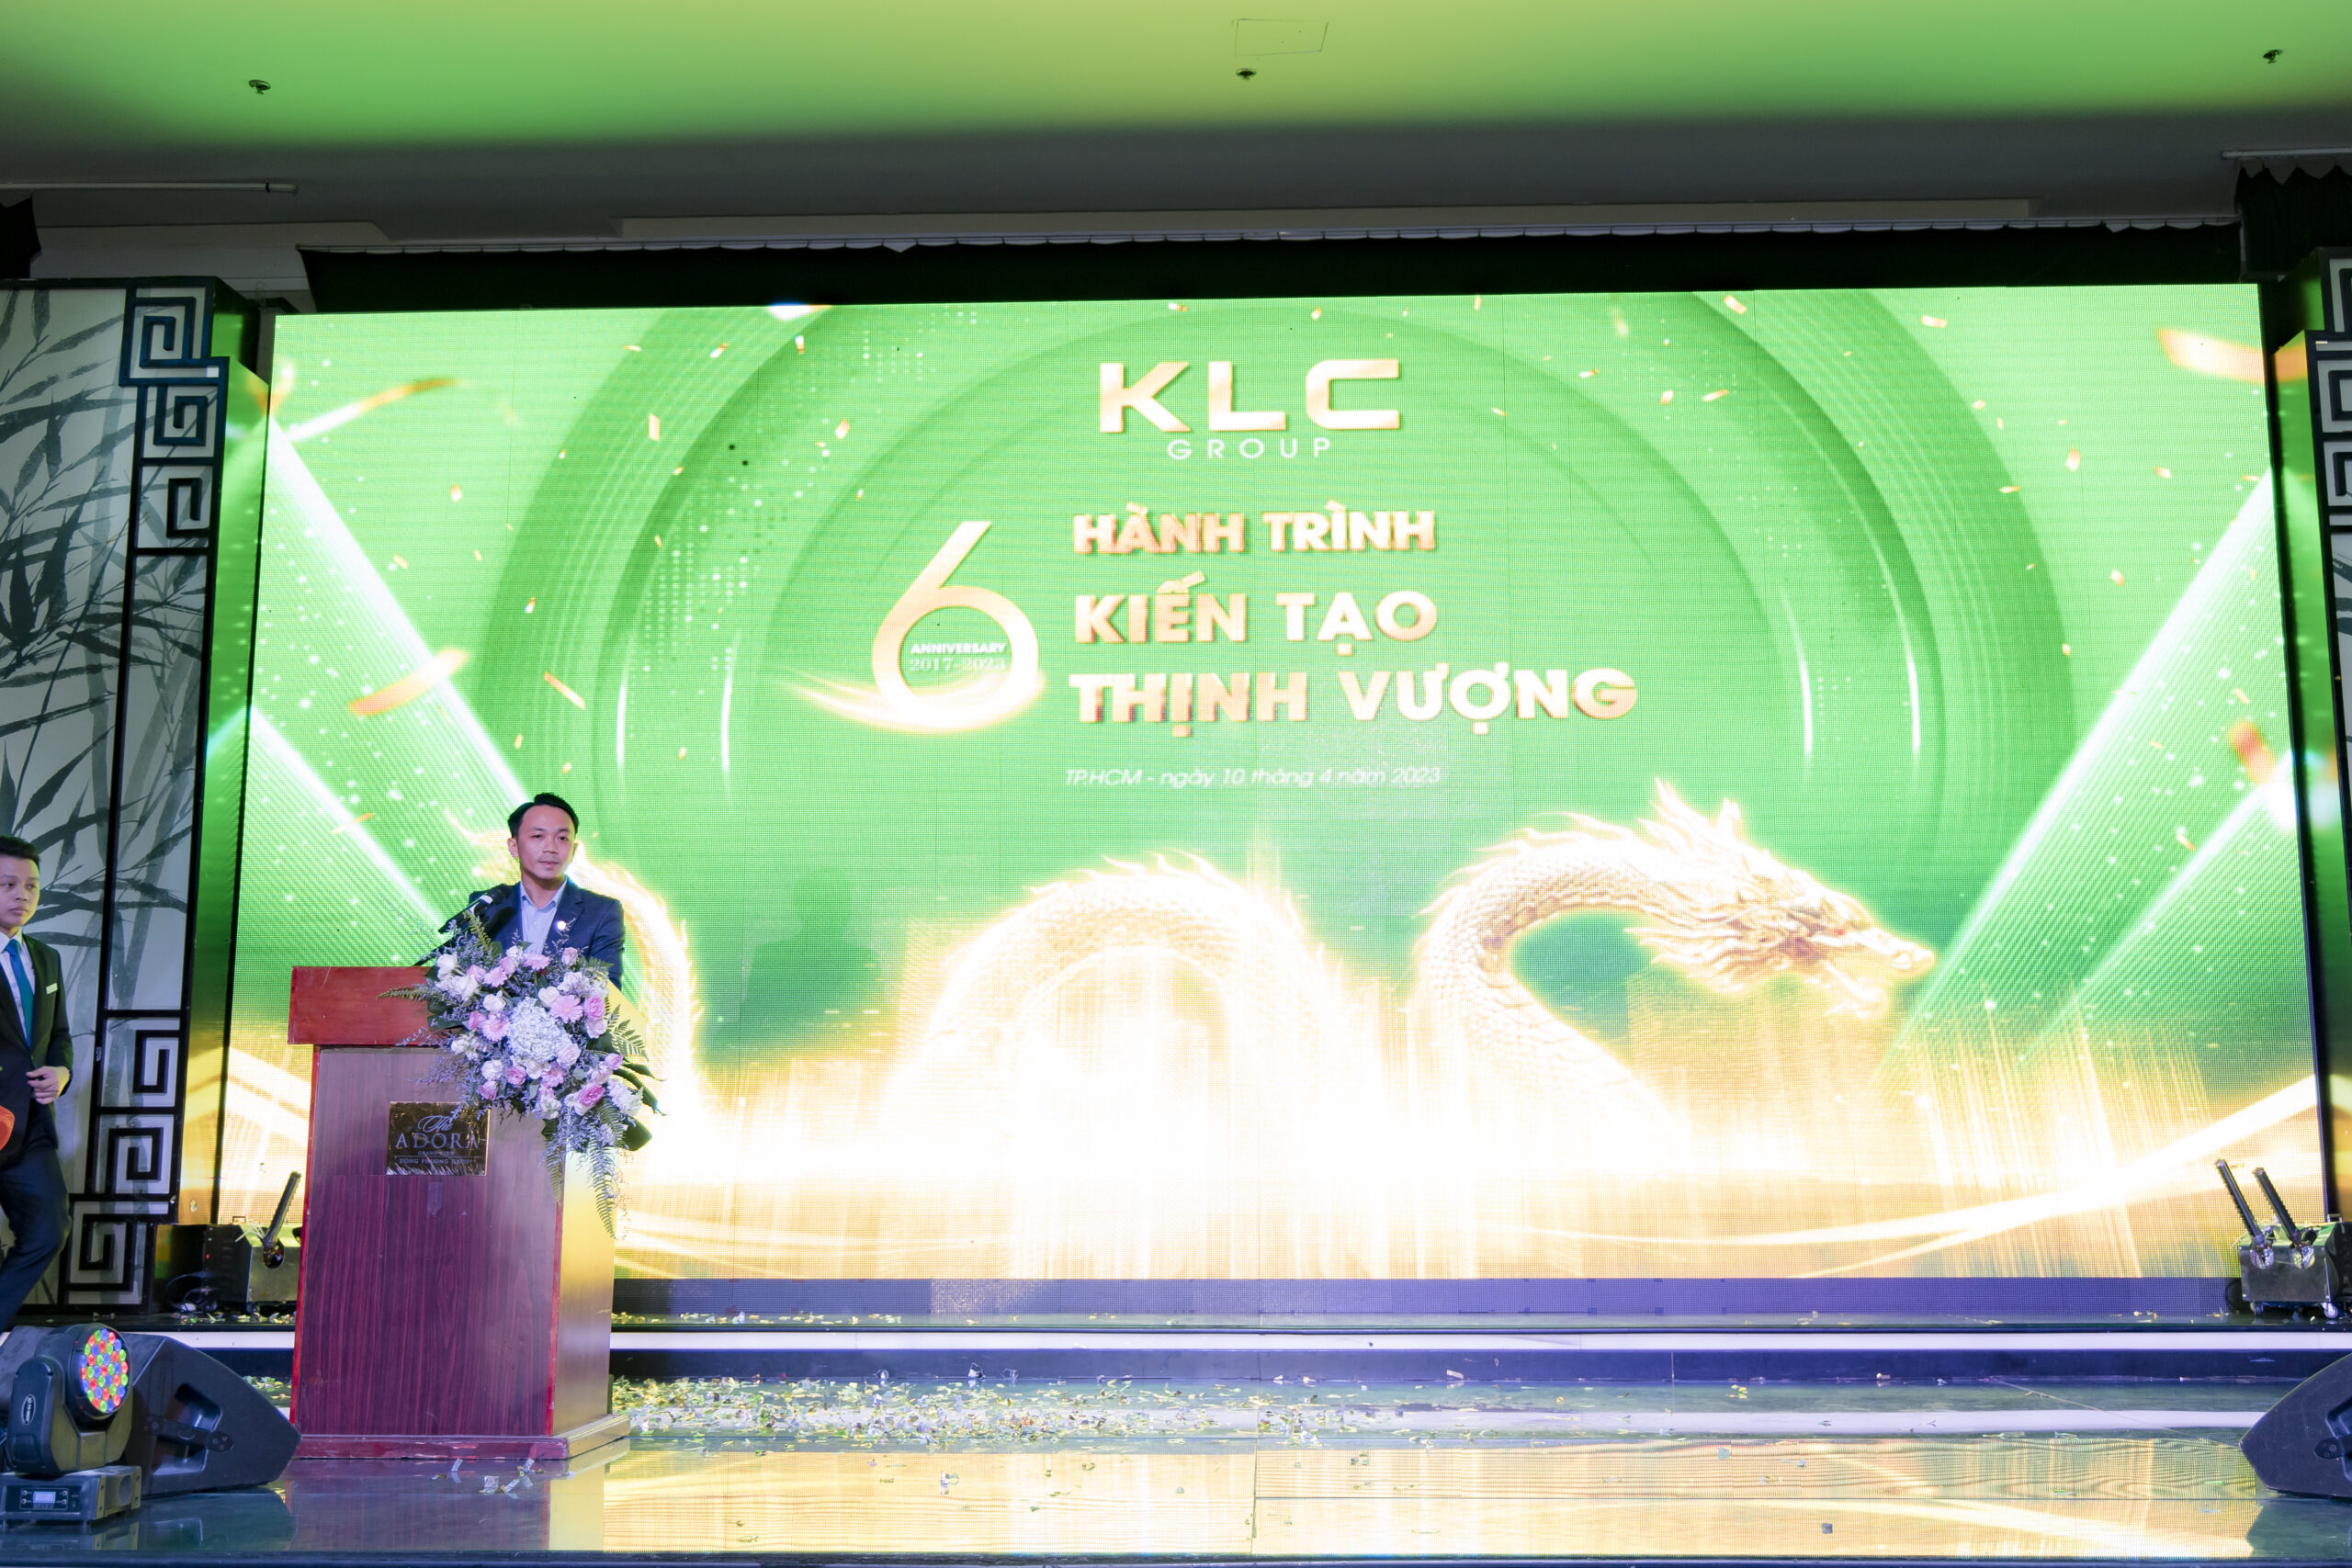 Lương Thế Anh, CEO of KLC Service Company Limited, expressed his thoughts after being appointed.